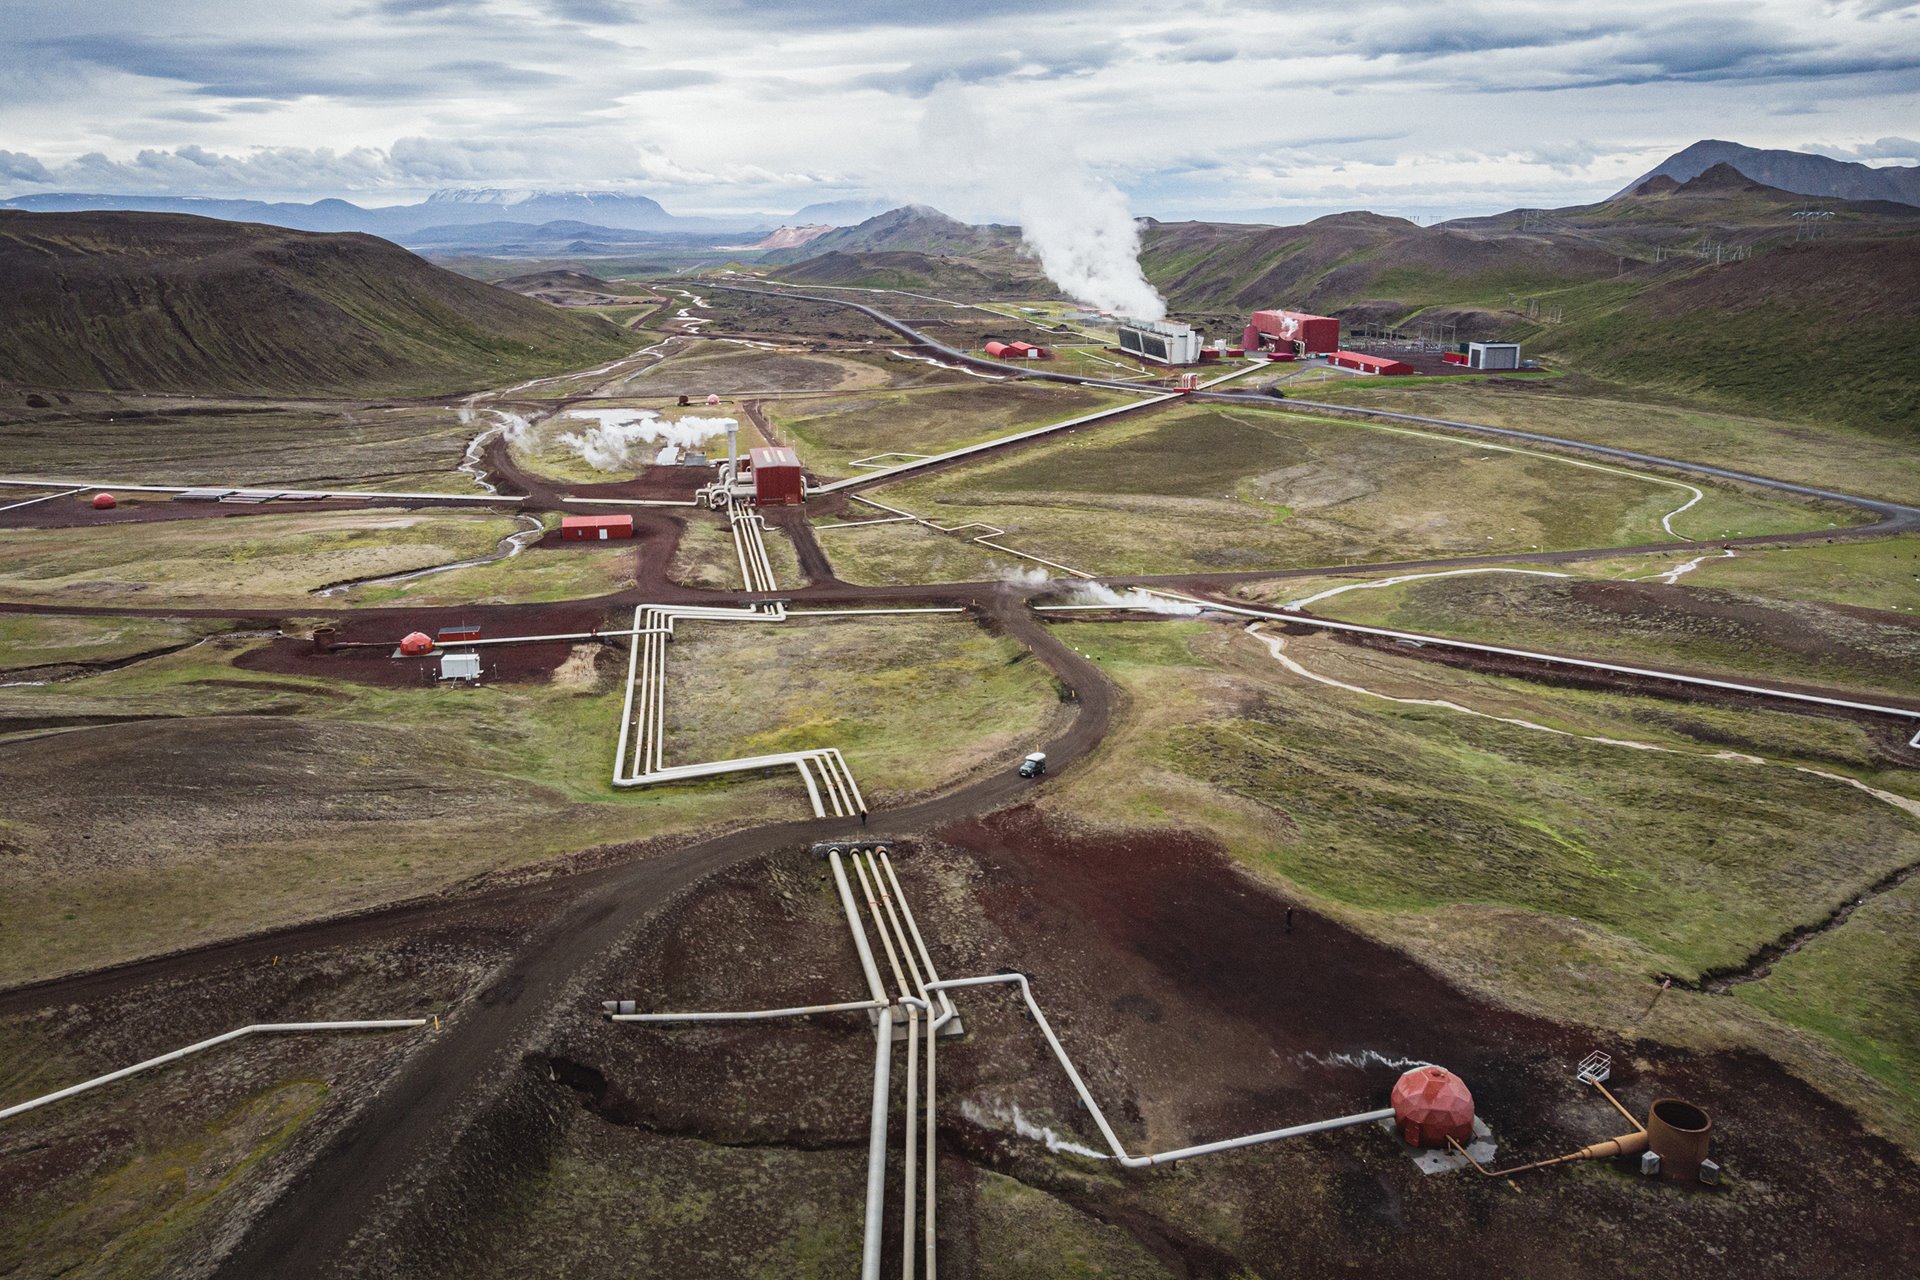 <p>Carbon emissions from a geothermal power station, in Krafla, Iceland, are reinjected into geothermal wells to minimize their environmental impact.&nbsp;</p>

<p>Geothermal power plants draw fluids from underground reservoirs to the surface to produce steam, which then drives turbines to generate electricity. The process is not emissions-free, as the remaining fluids contain harmful condensates, but the plant injects these back into deep bedrock, where the CO2 can turn rapidly into minerals. Geodesic domes cover the boreholes and equipment, reducing the visual impact on the environment. In 2020, this plant fixed over 50,000 tonnes of CO2 in this way. Such carbon fixing remains a controversial issue, with critics saying that the technologies distract from the pressing need to reduce carbon emissions rather than capturing them.</p>
